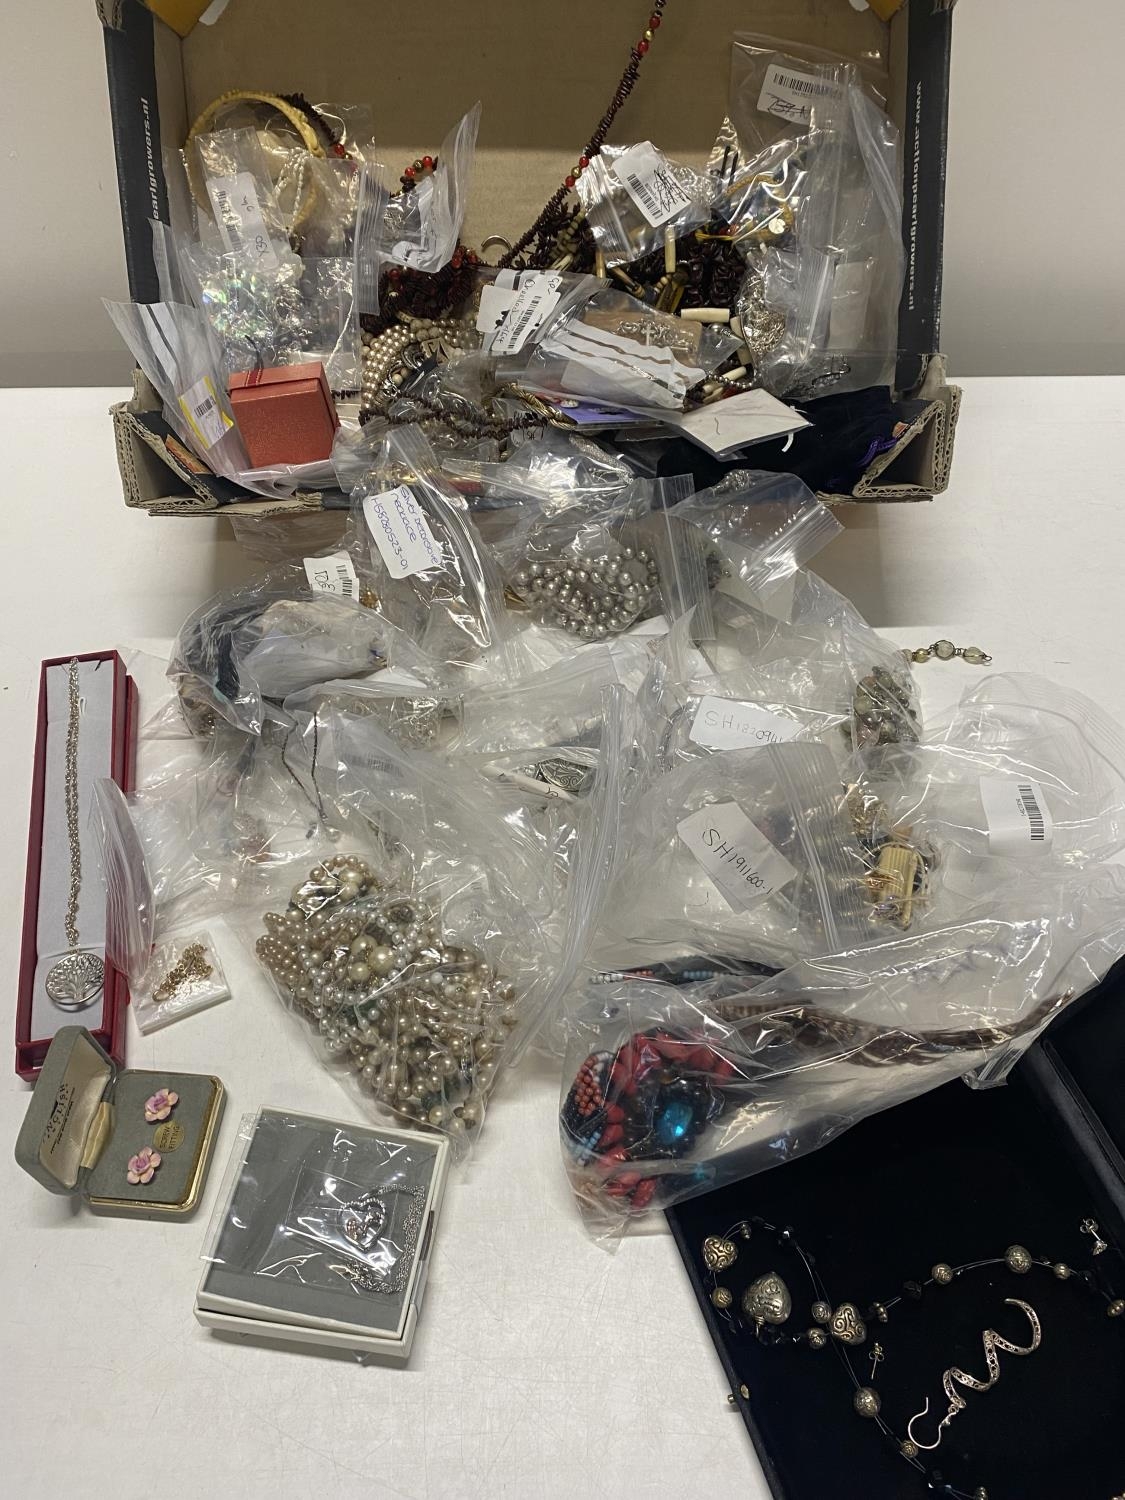 A large job lot of assorted costume jewellery